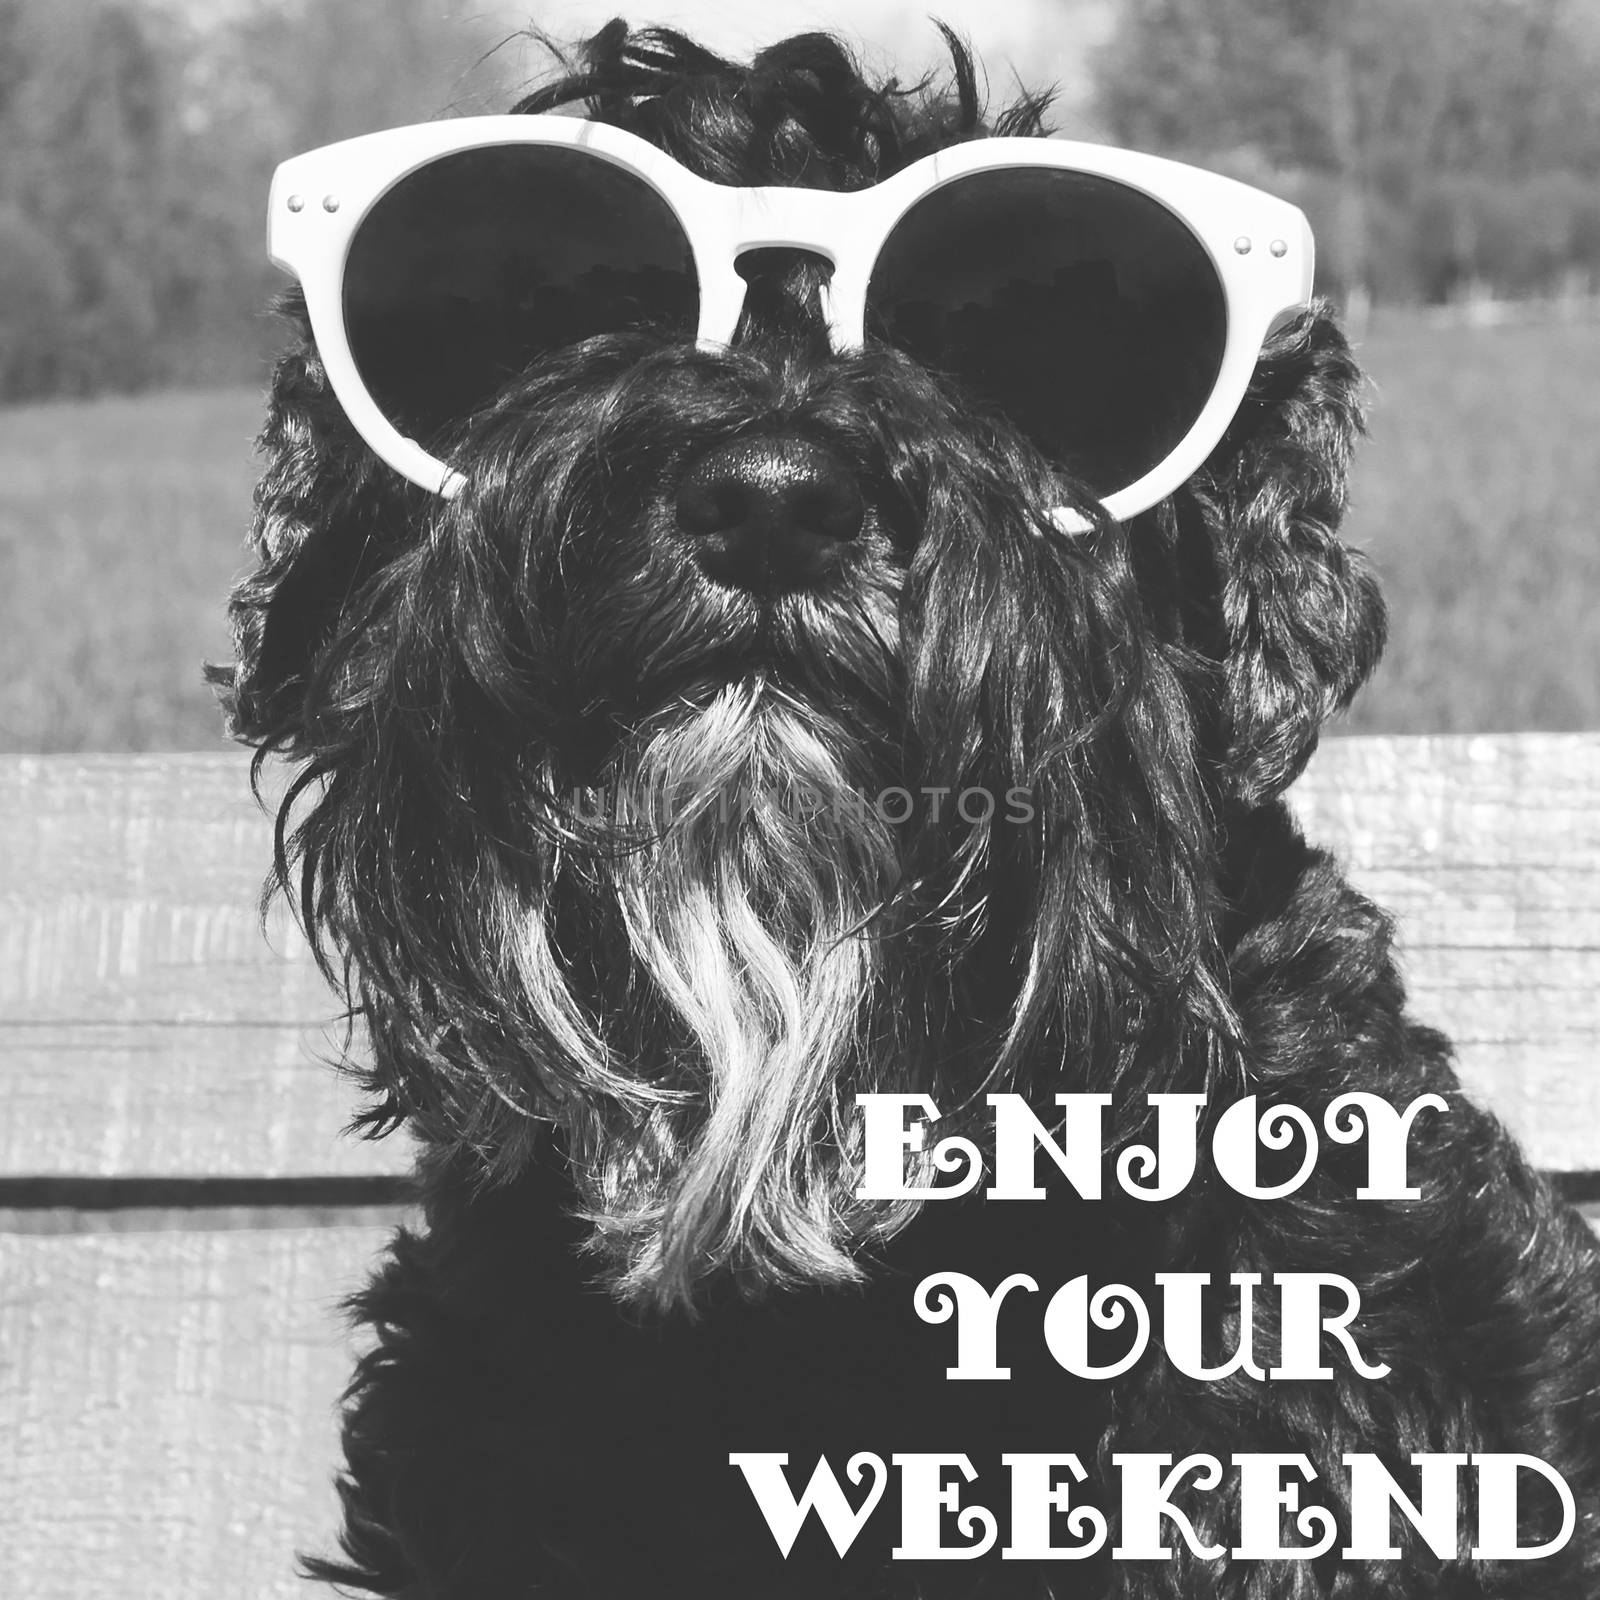 Dog in sunglasses with text: Enjoy your weekend by Voinakh